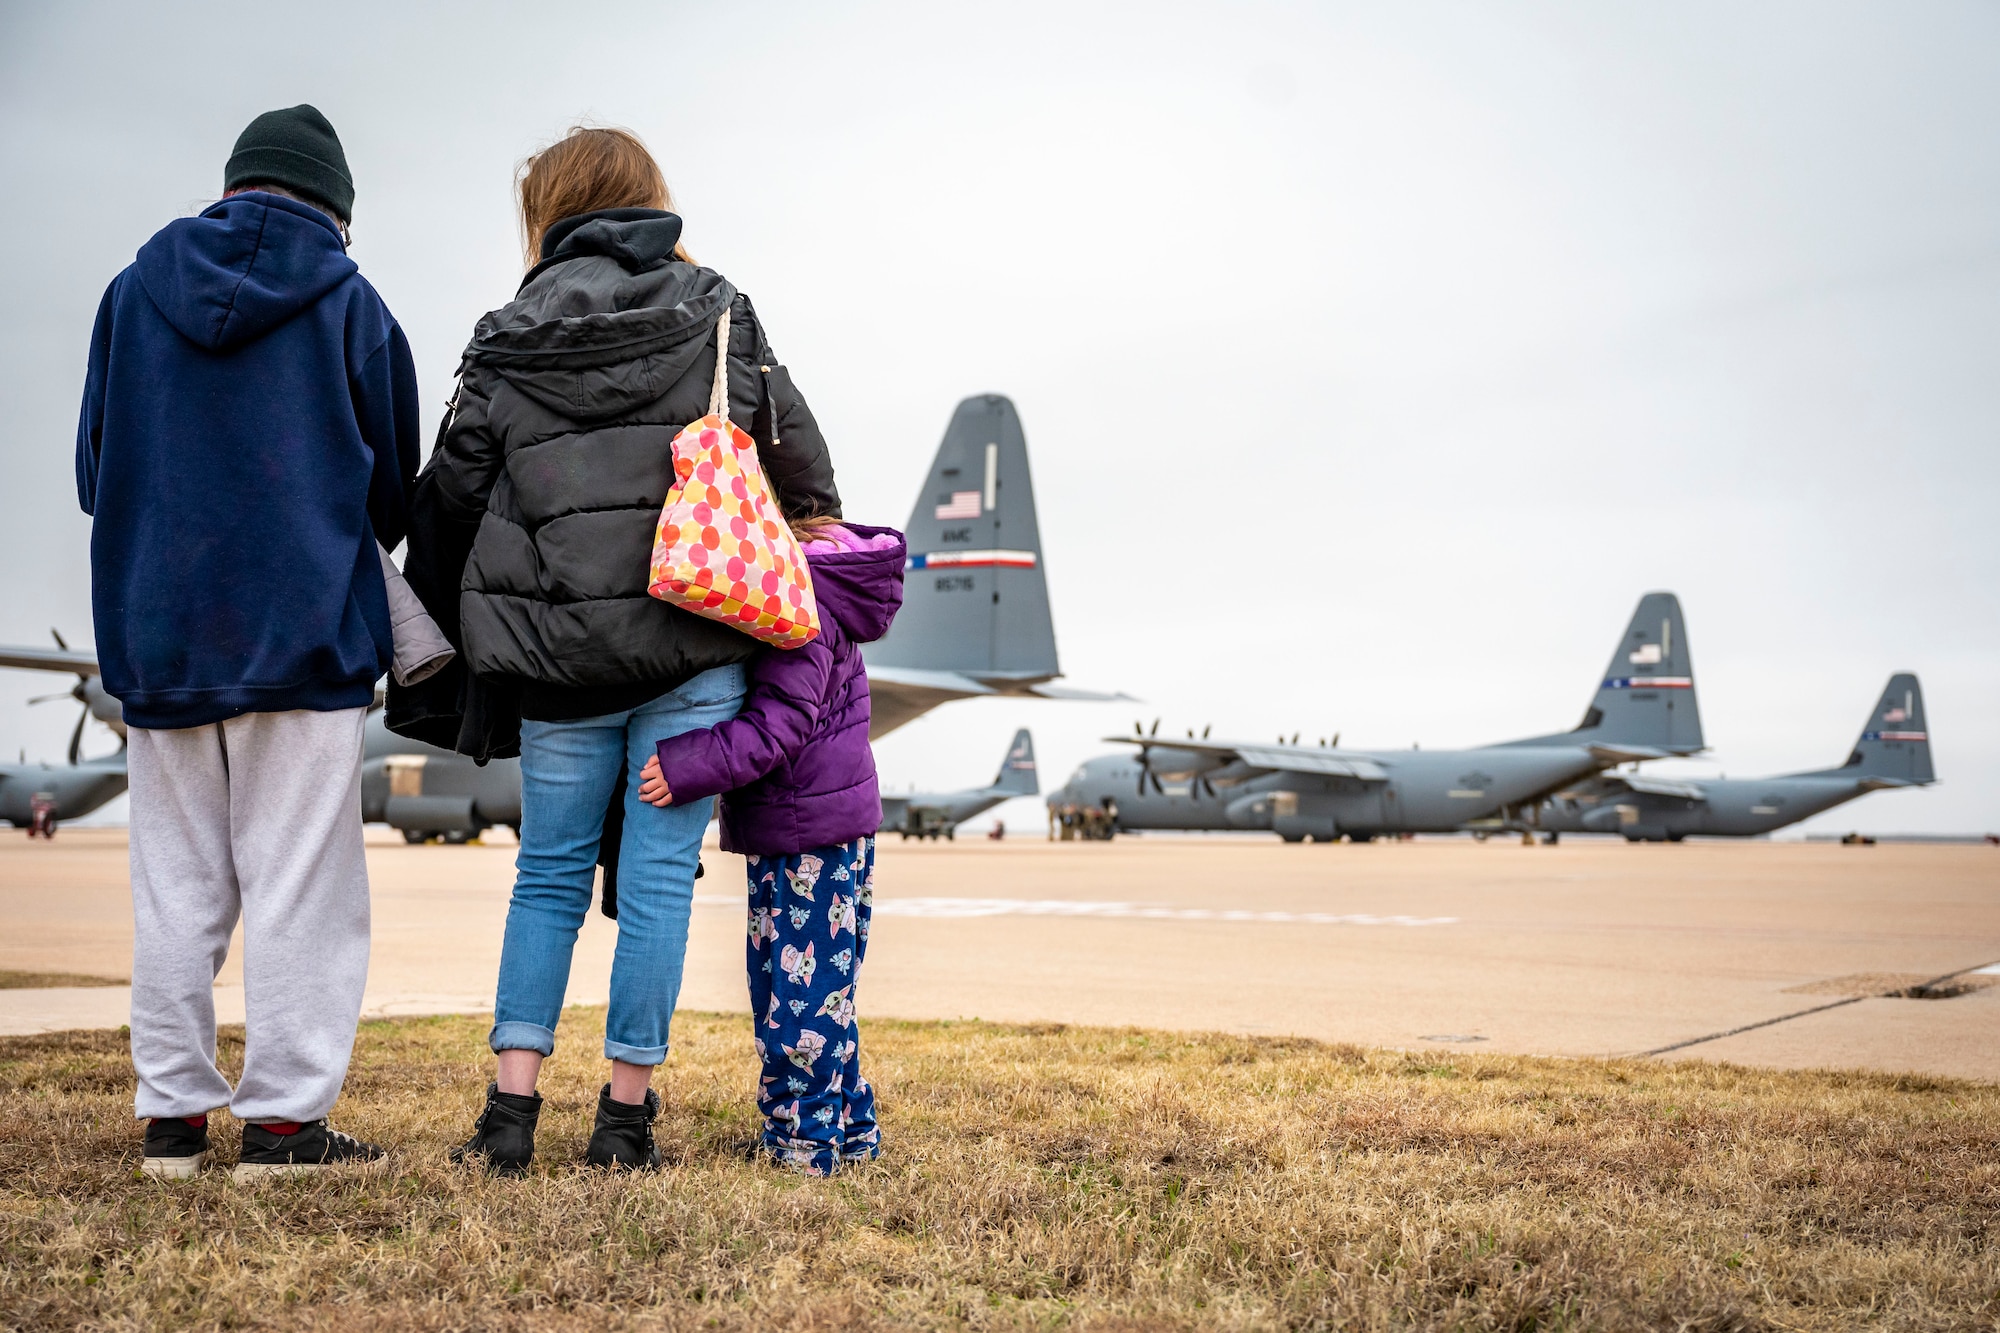 A family watches as U.S. Air Force Airmen assigned to the 317th Airlift Wing boards a C-130J Super Hercules before leaving for a deployment at Dyess Air Force Base, Texas, Feb. 25, 2023. Members from the 317th were deployed to the Middle East in support of the U.S. Central Command’s continued mission of enabling military operations and activities with allies and partners to increase regional security and stability in support of enduring U.S. interests. (U.S. Air Force photo by Senior Airman Leon Redfern)